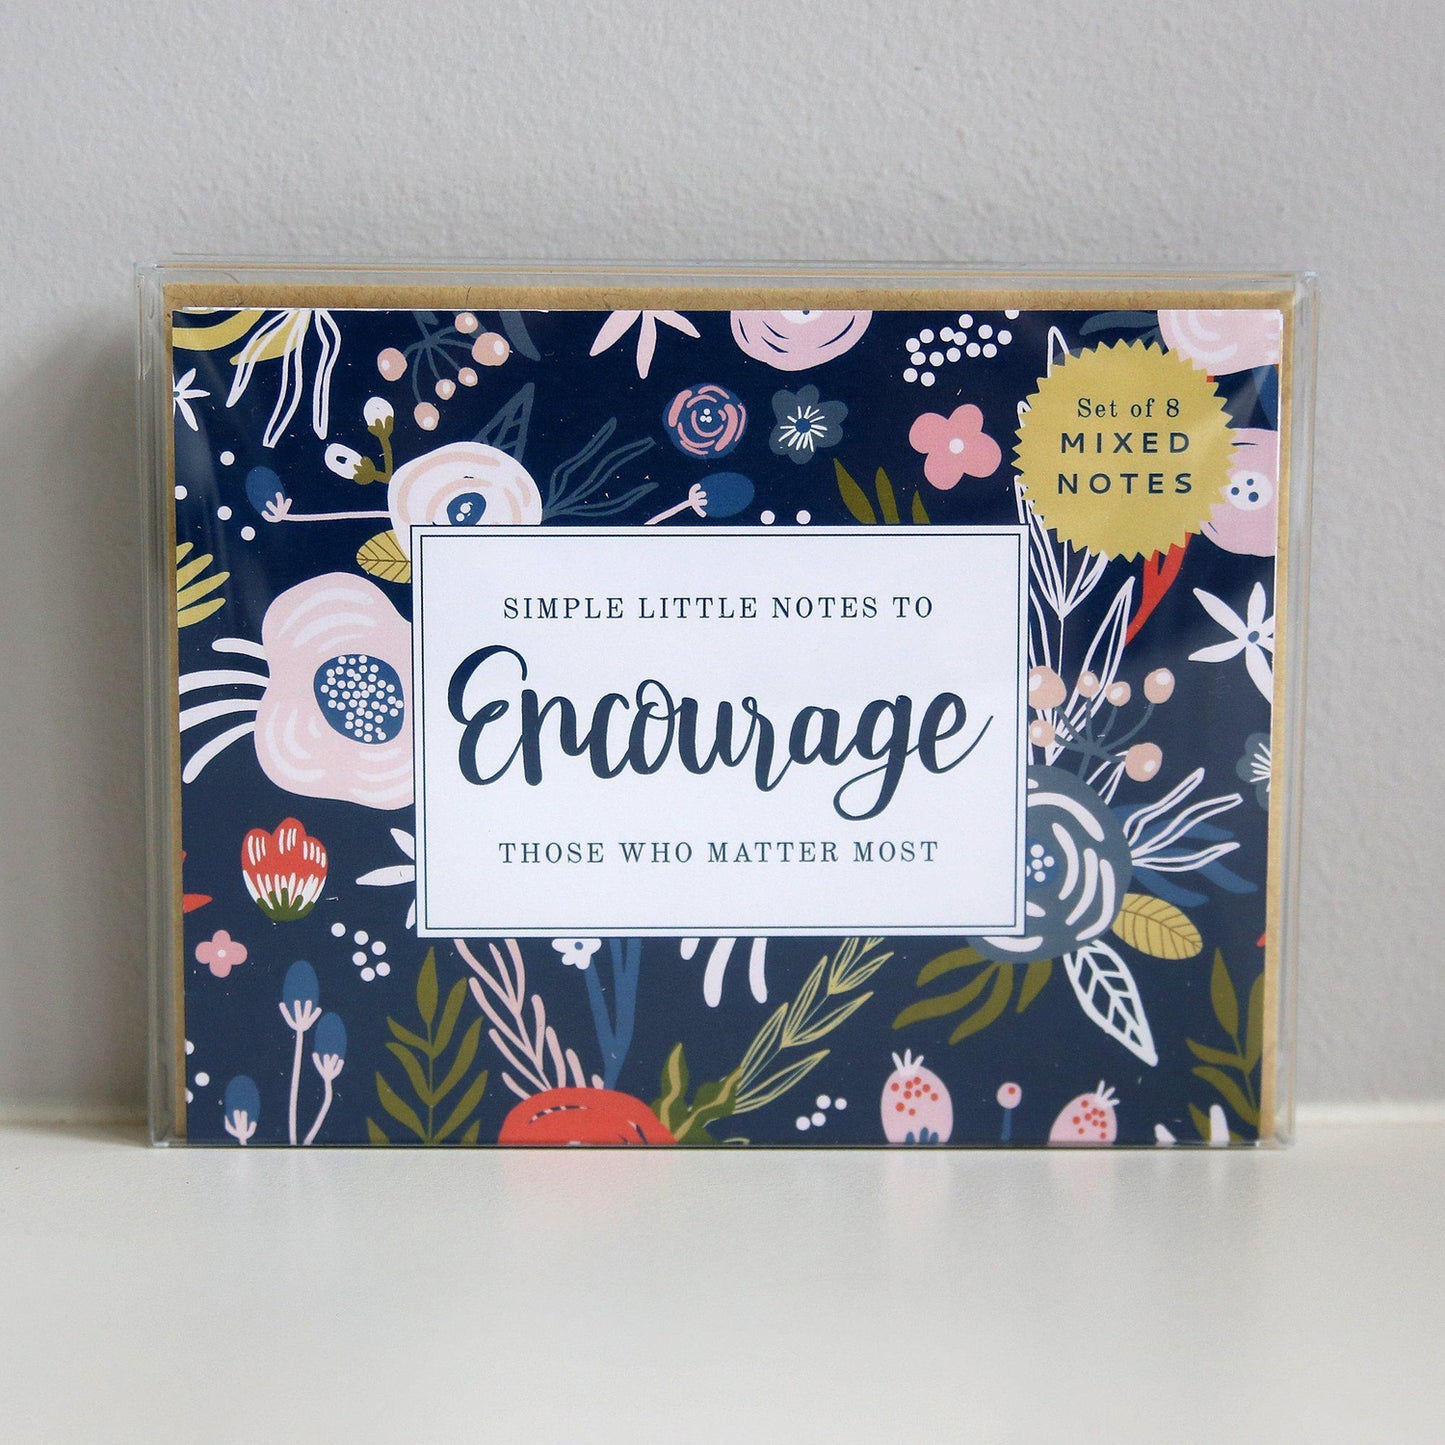 Encouragement notecard set from Muscadine Press.